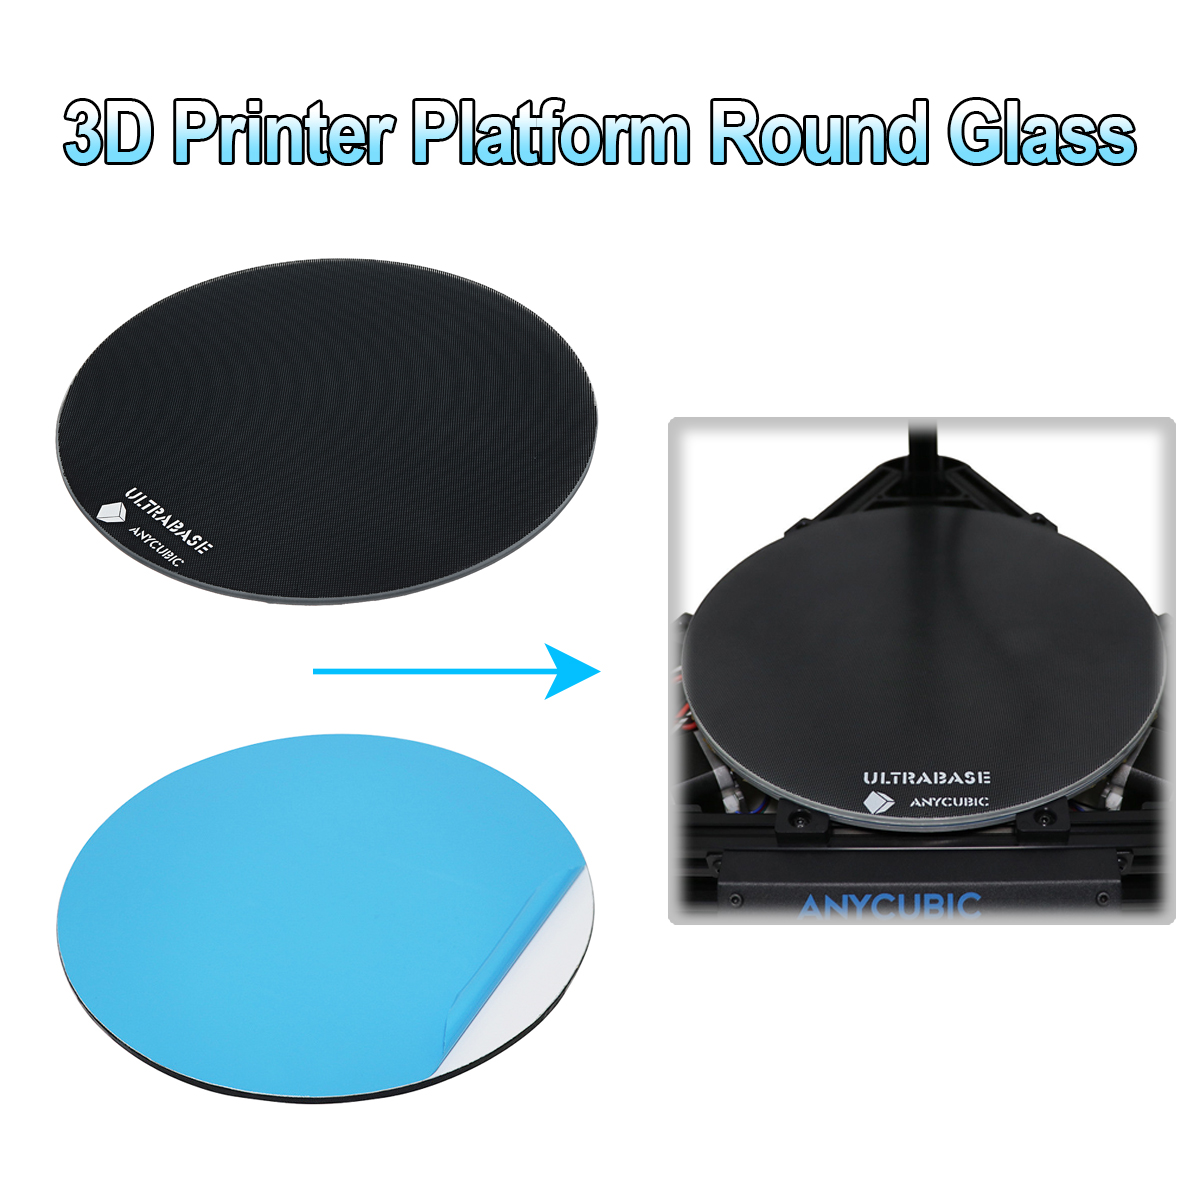 Anycubic 240mm*4mm Ultrabase Round Glass Build Plate Hot Bed Platform For 3D Printer 22